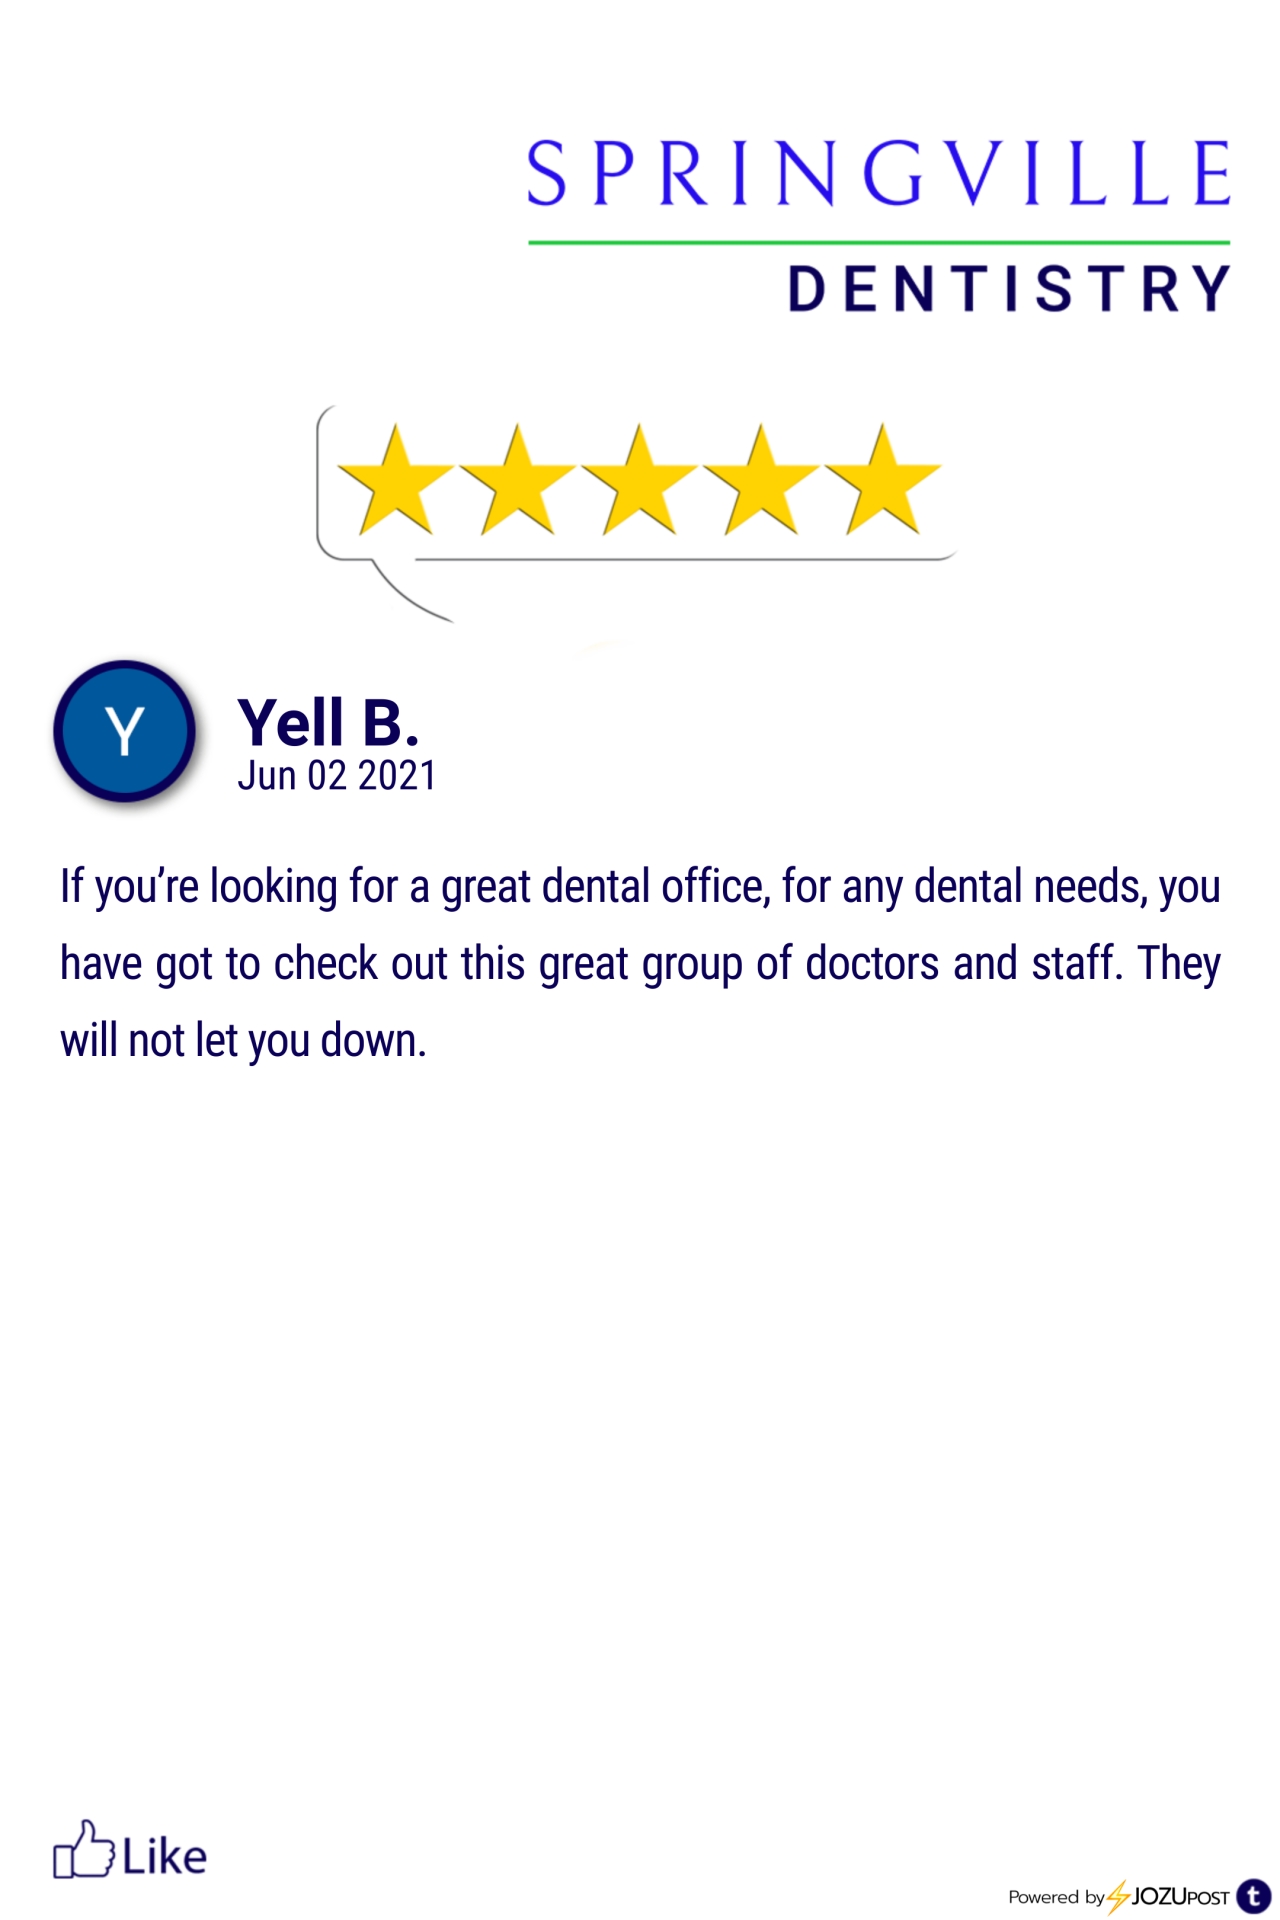 We appreciate our patients!
Here is our latest Five-Star Review from Yell B. We love to recognize those patients that take the time to fill out a review and let us know how we are doing.
Here is what Yell B. had to say: “If you’re looking for a great...